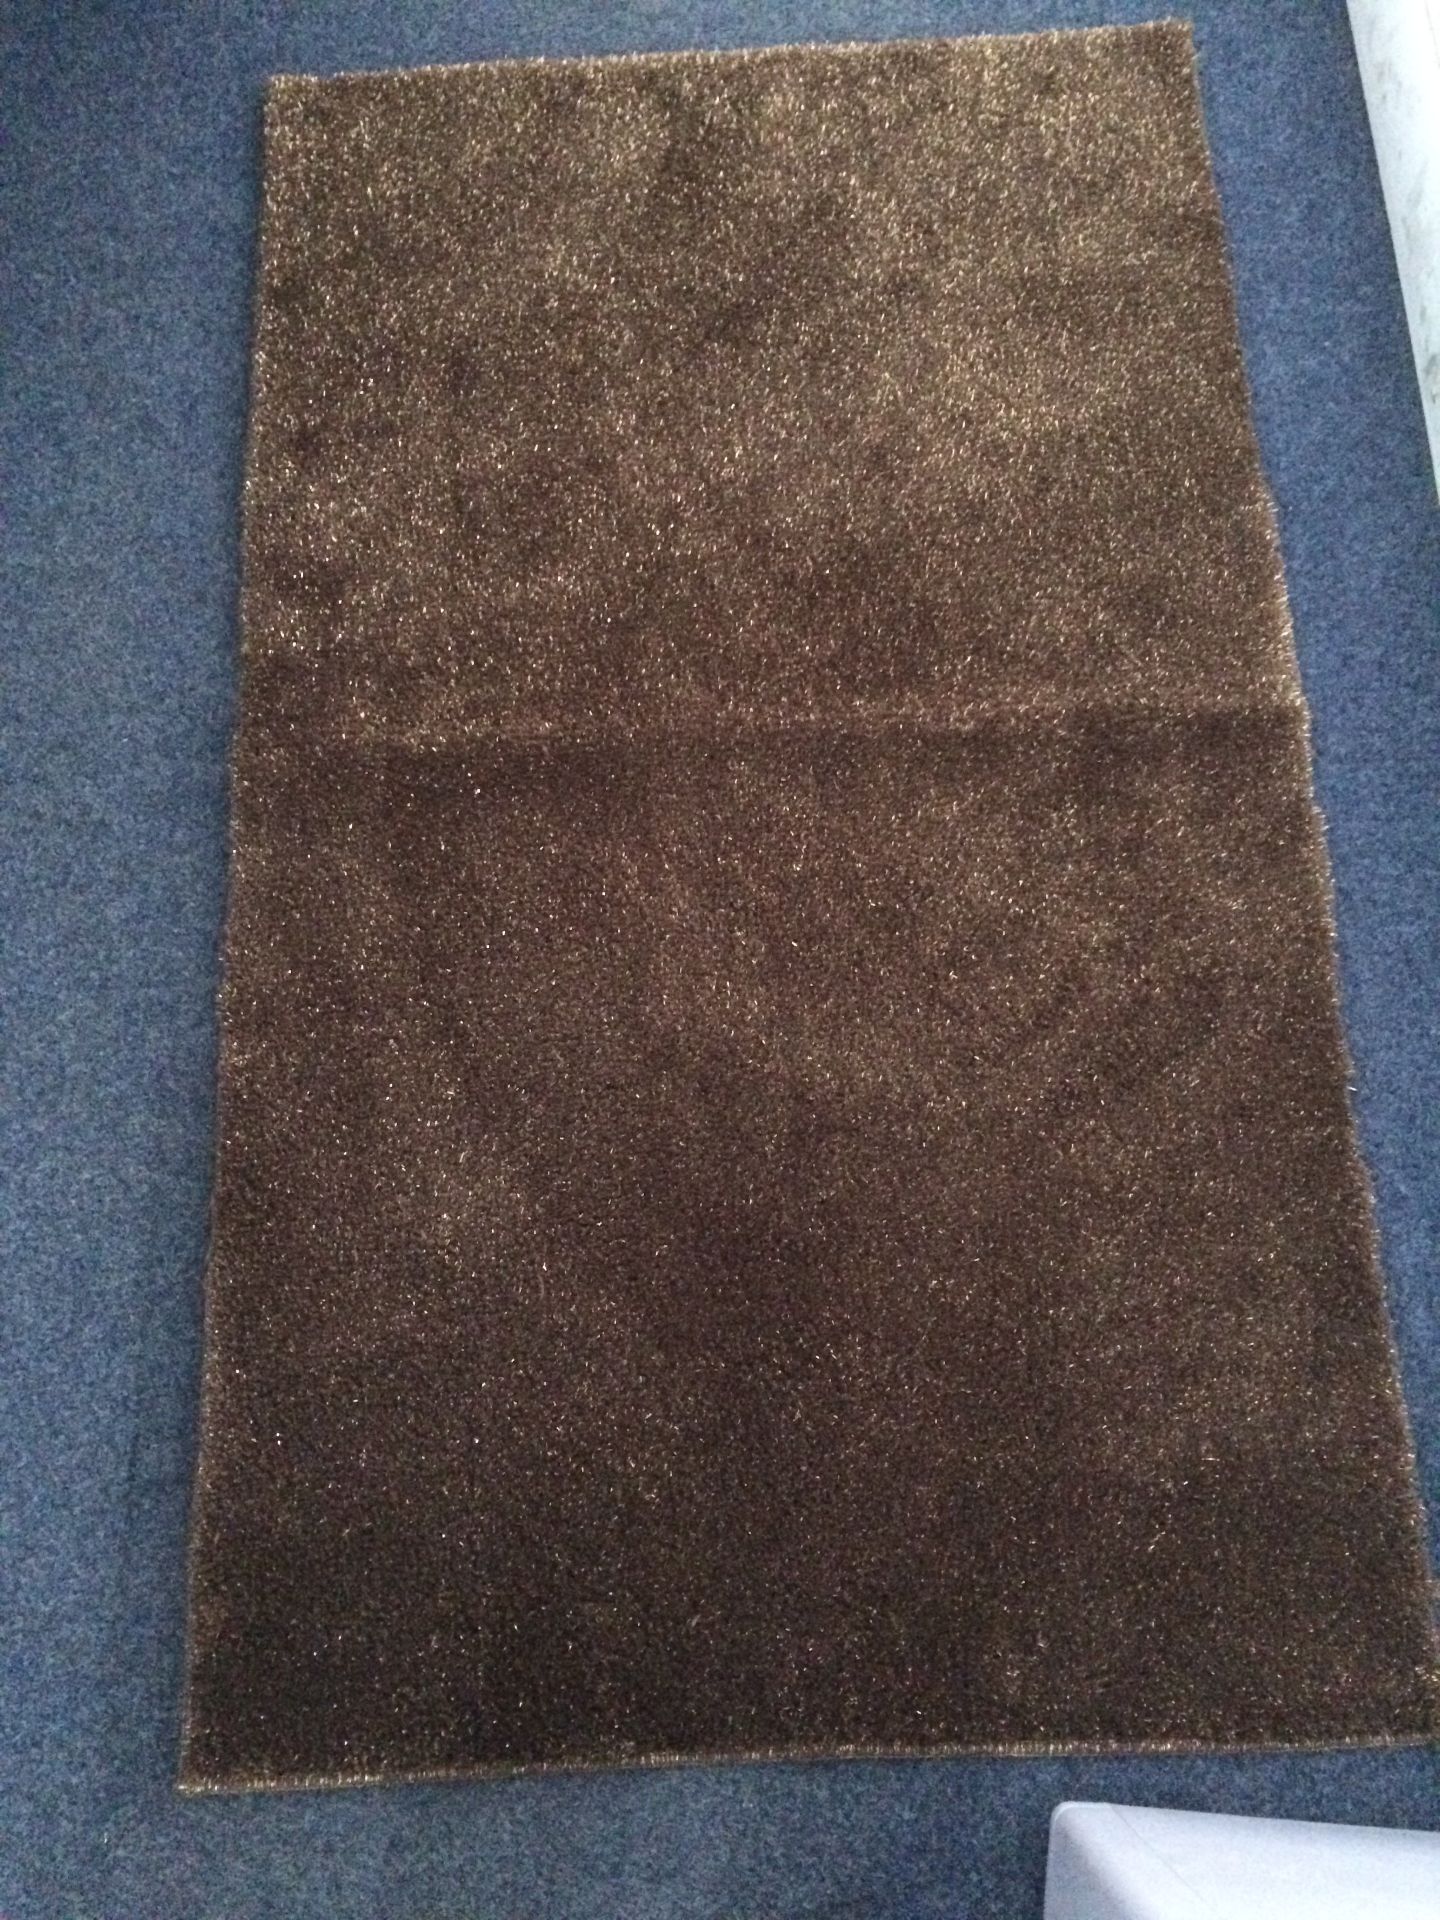 V Brand New Shaggy Rug - Soft Touch - Dimension 72 cm x 120 cm- brown color NOTE: Item is